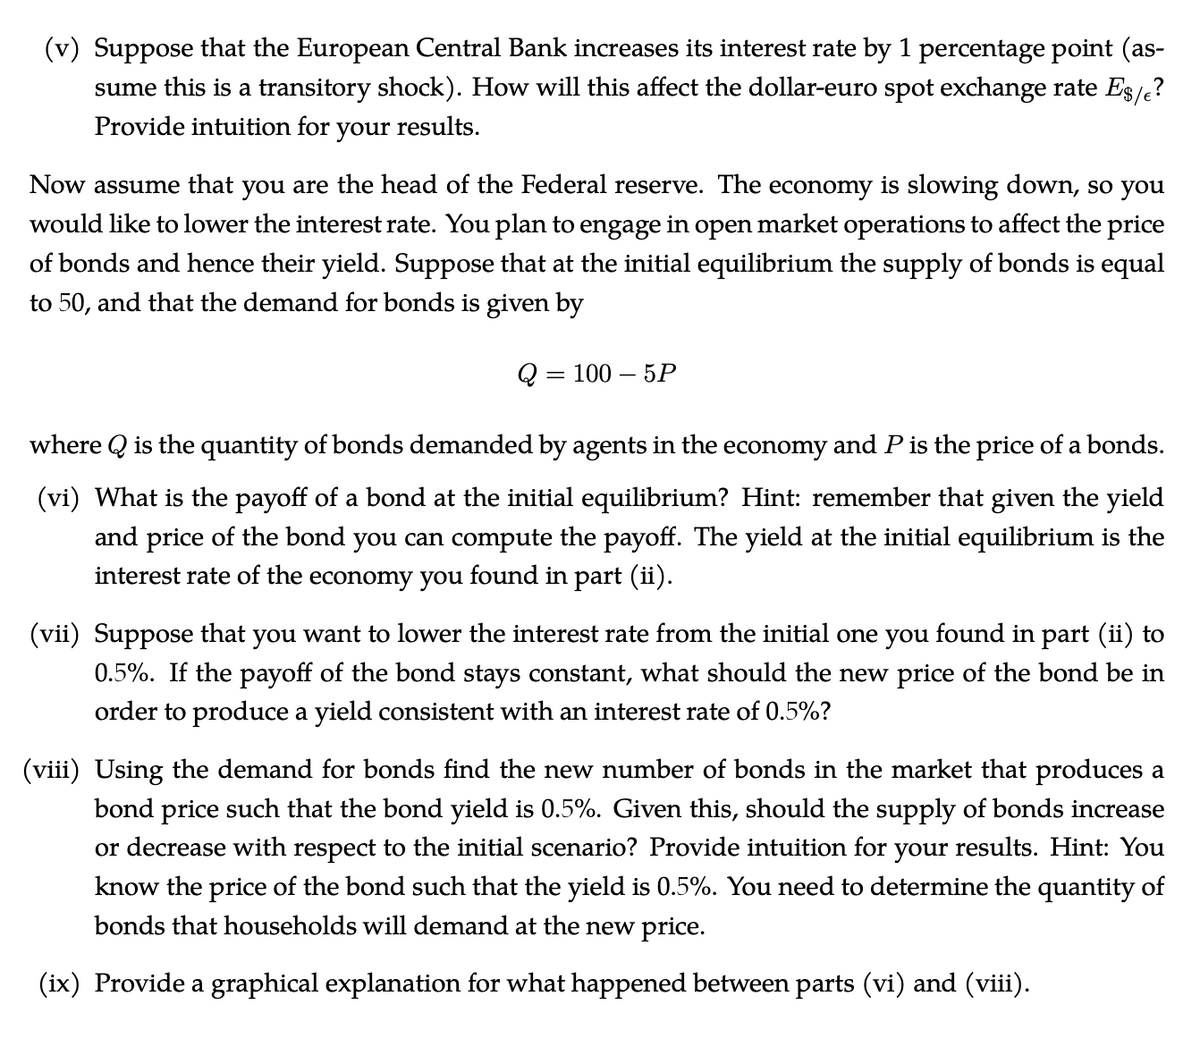 (v) Suppose that the European Central Bank increases its interest rate by 1 percentage point (as-
sume this is a transitory shock). How will this affect the dollar-euro spot exchange rate Es/?
Provide intuition for your results.
Now assume that you are the head of the Federal reserve. The economy is slowing down, so you
would like to lower the interest rate. You plan to engage in open market operations to affect the price
of bonds and hence their yield. Suppose that at the initial equilibrium the supply of bonds is equal
to 50, and that the demand for bonds is given by
100 — 5Р
where Q is the quantity of bonds demanded by agents in the economy and P is the price of a bonds.
(vi) What is the payoff of a bond at the initial equilibrium? Hint: remember that given the yield
and price of the bond you can compute the payoff. The yield at the initial equilibrium is the
interest rate of the economy you found in part (ii).
(vii) Suppose that you want to lower the interest rate from the initial one you found in part (ii) to
0.5%. If the payoff of the bond stays constant, what should the new price of the bond be in
order to produce a yield consistent with an interest rate of 0.5%?
(viii) Using the demand for bonds find the new number of bonds in the market that produces a
bond price such that the bond yield is 0.5%. Given this, should the supply of bonds increase
or decrease with respect to the initial scenario? Provide intuition for your results. Hint: You
know the price of the bond such that the yield is 0.5%. You need to determine the quantity of
bonds that households will demand at the new price.
(ix) Provide a graphical explanation for what happened between parts (vi) and (viii).
